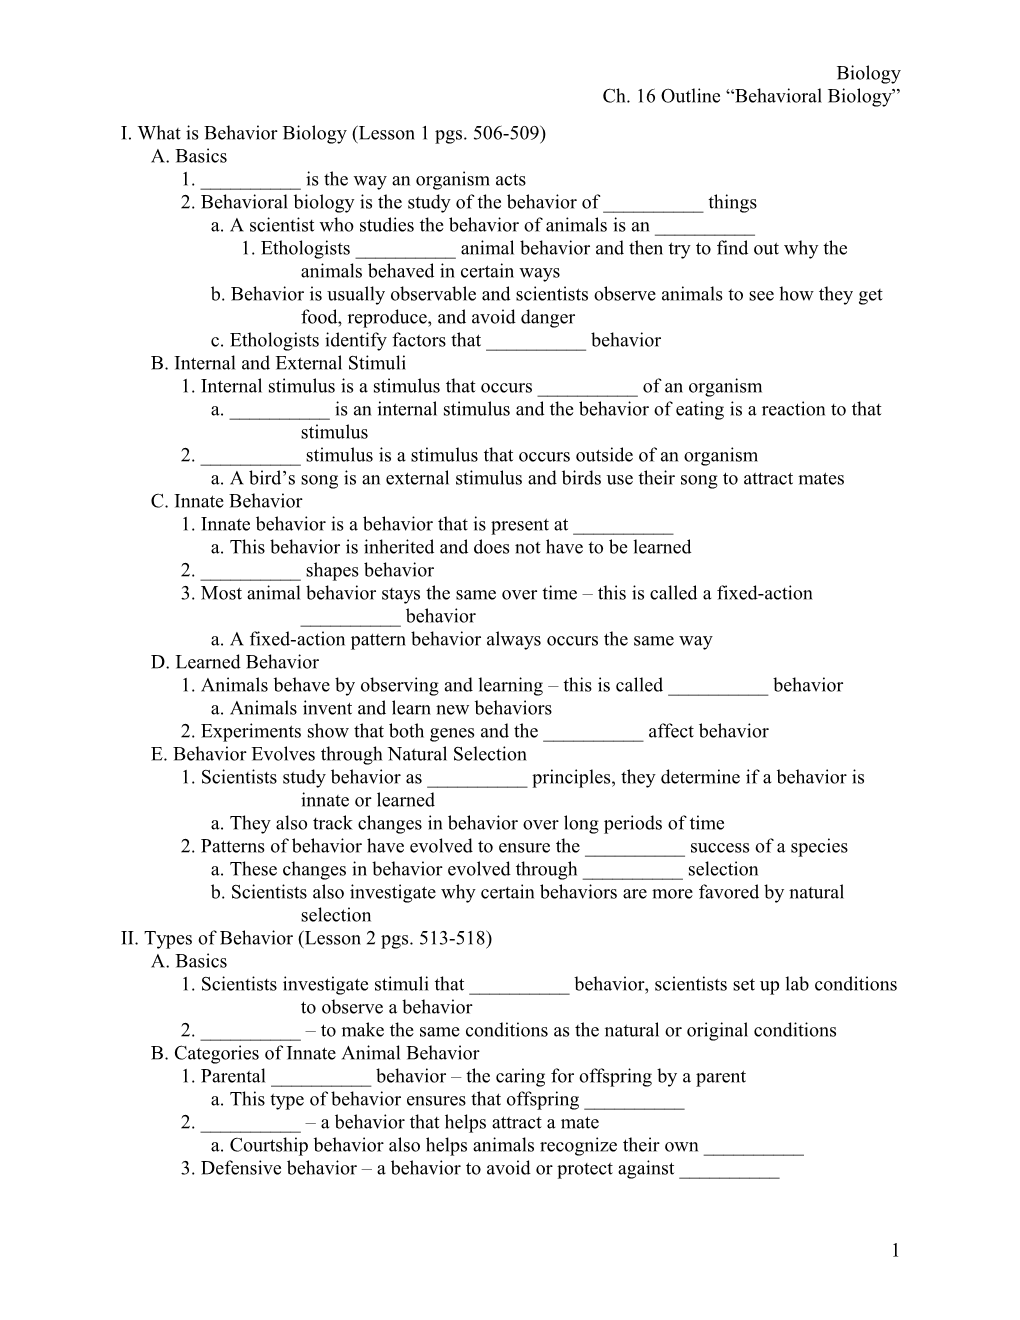 I. What Is Behavior Biology (Lesson 1 Pgs. 506-509)